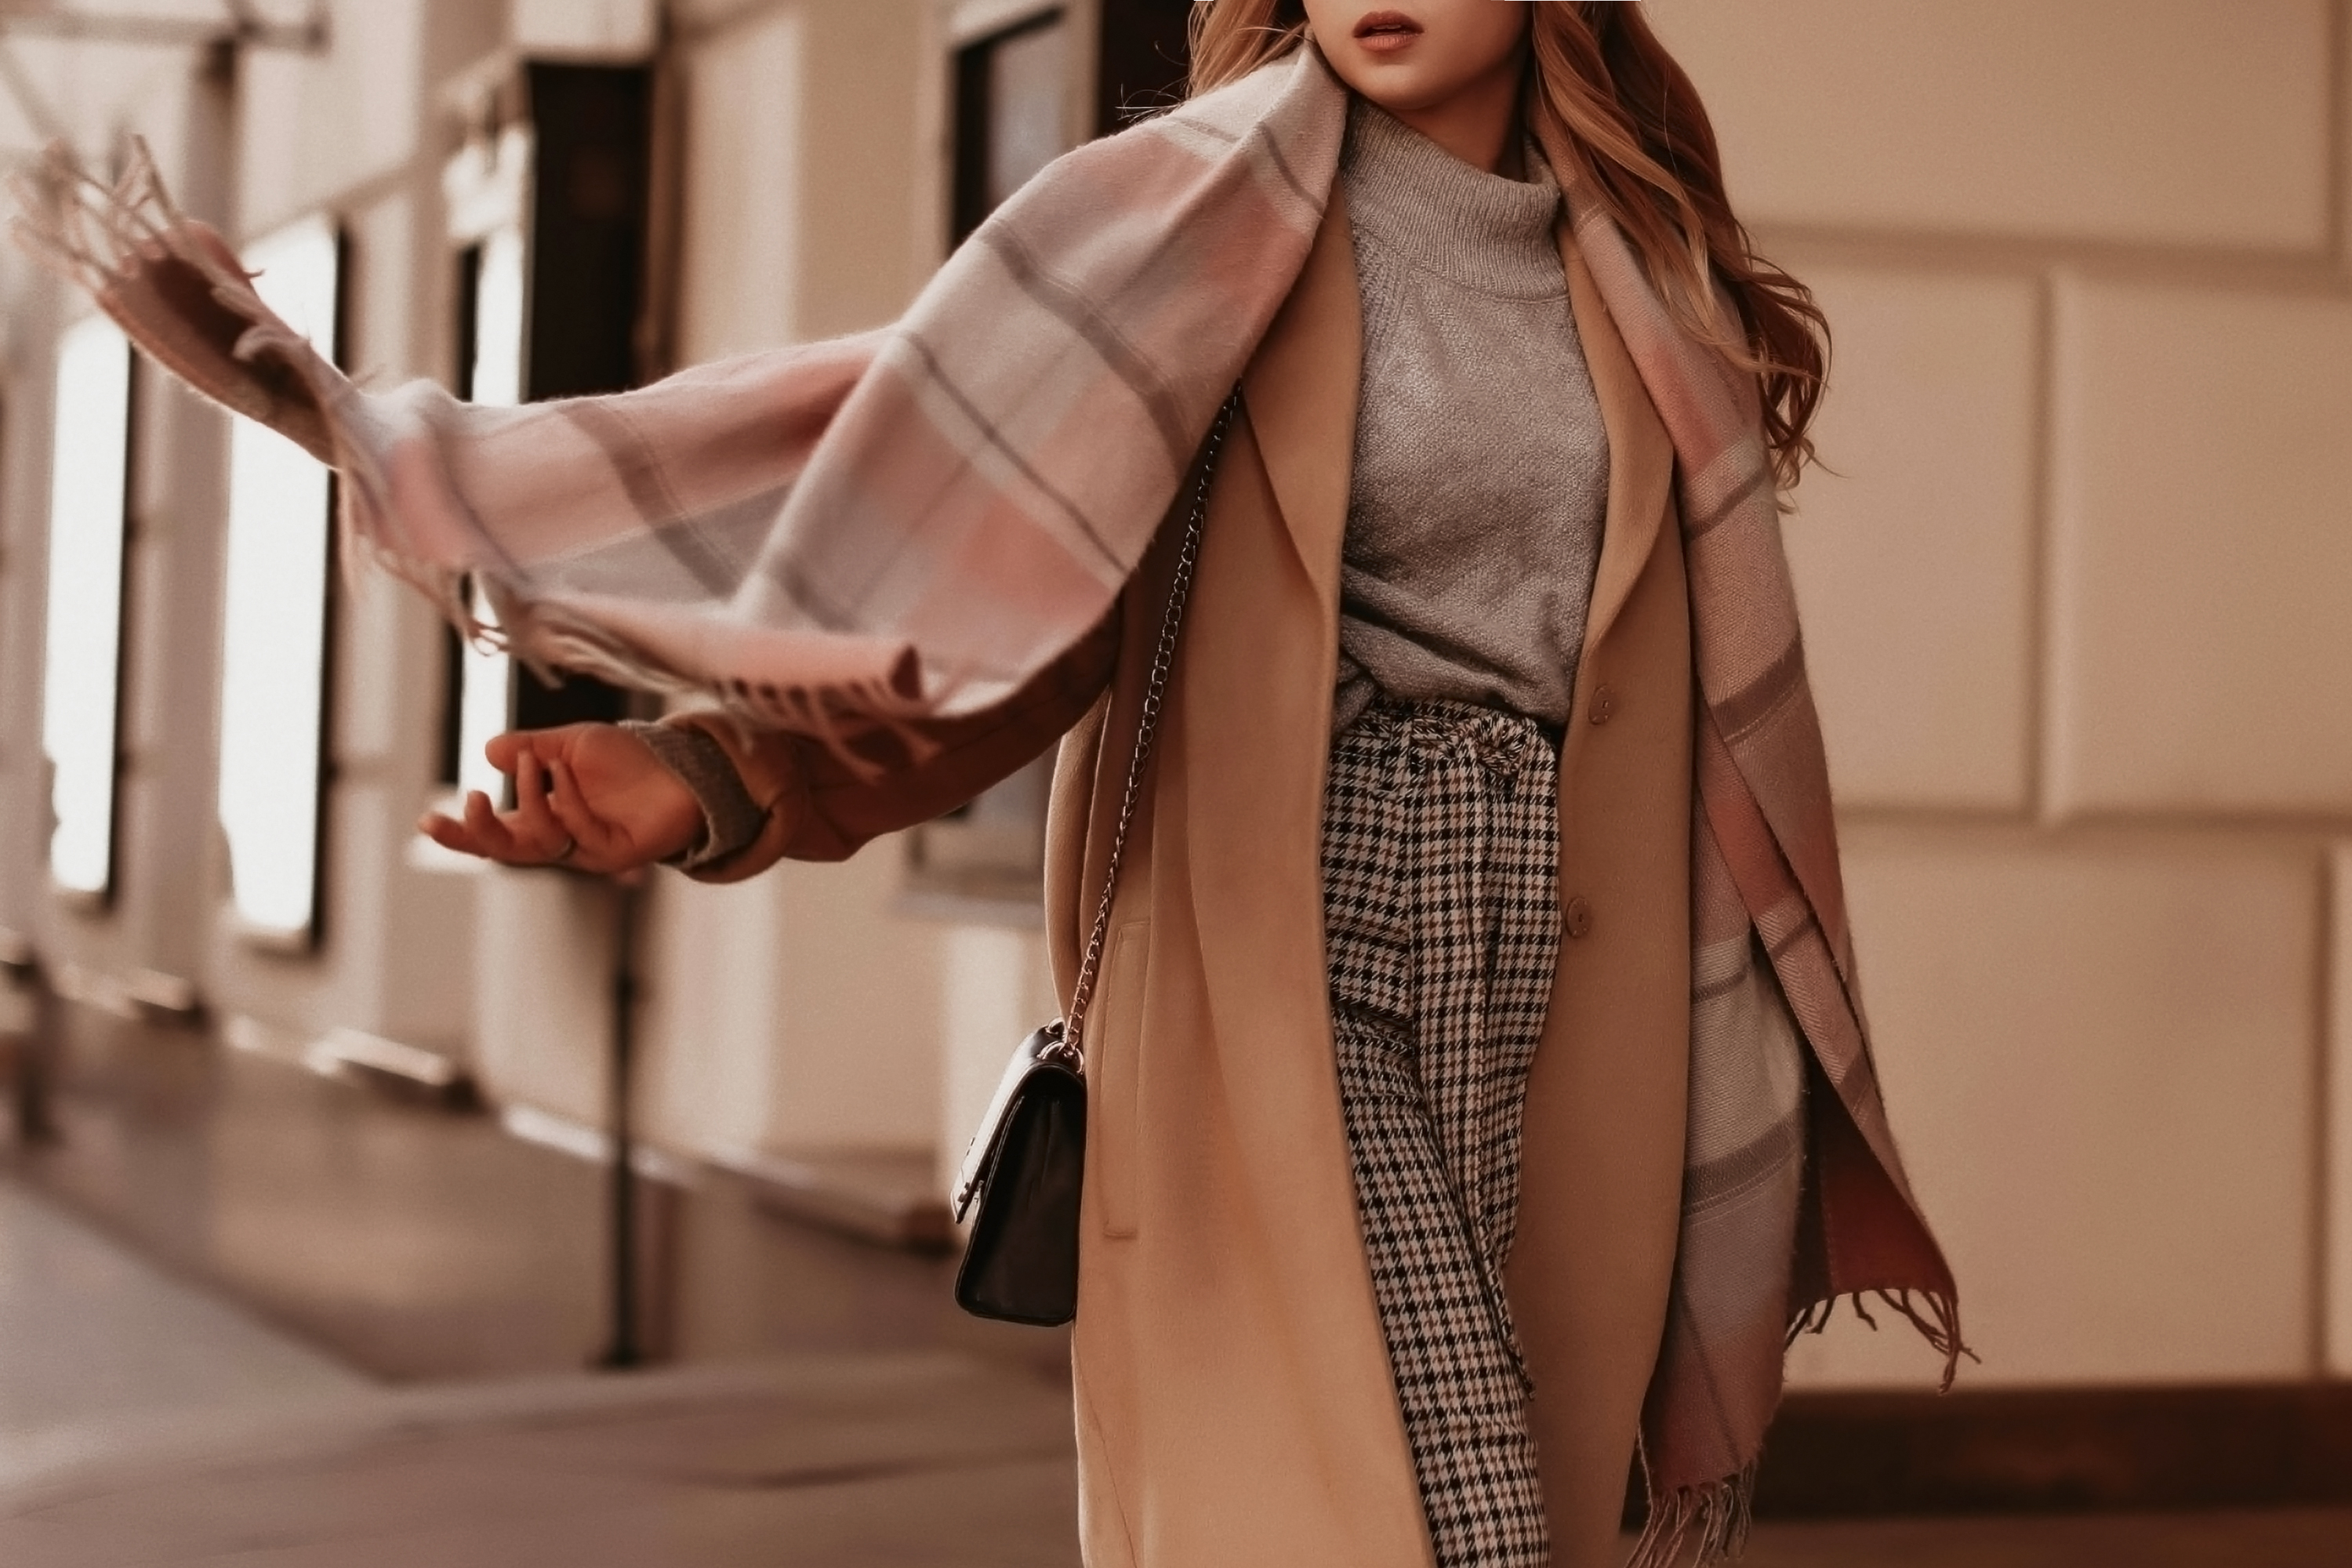 Grey Knitted Cozy Sweater, Scarf,  Paid Pants & Brown Coat 